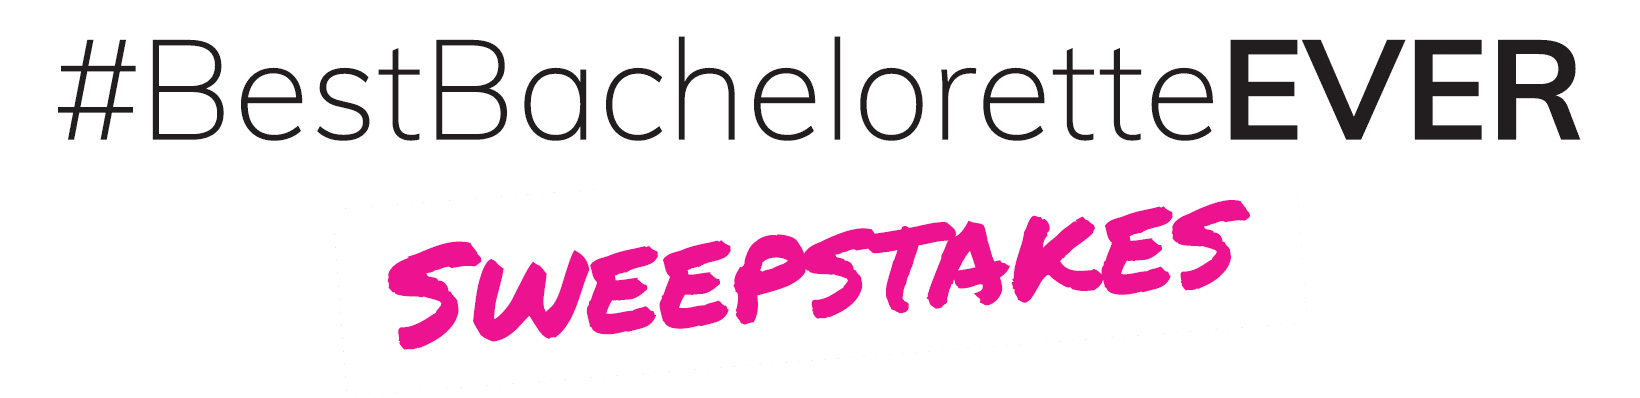 Best Bachelorette Ever Sweepstakes